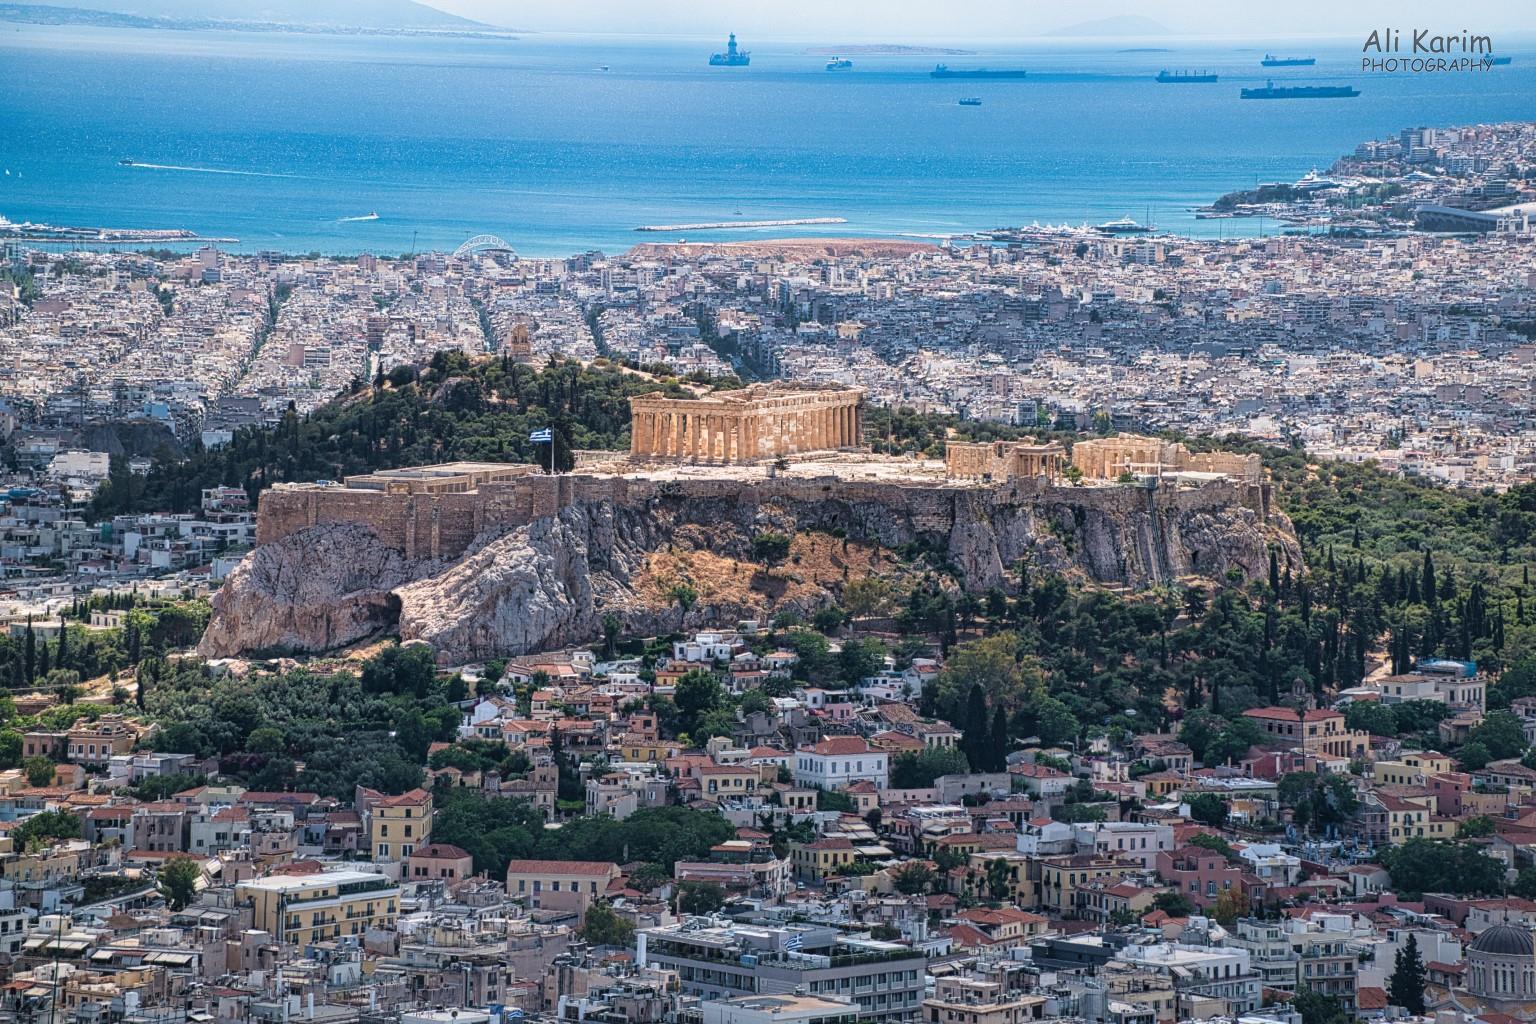 More Athens, Greece, May 2021, Breathtaking view of the Acropolis, Parthenon, the city of Athens, and the Aegean Sea